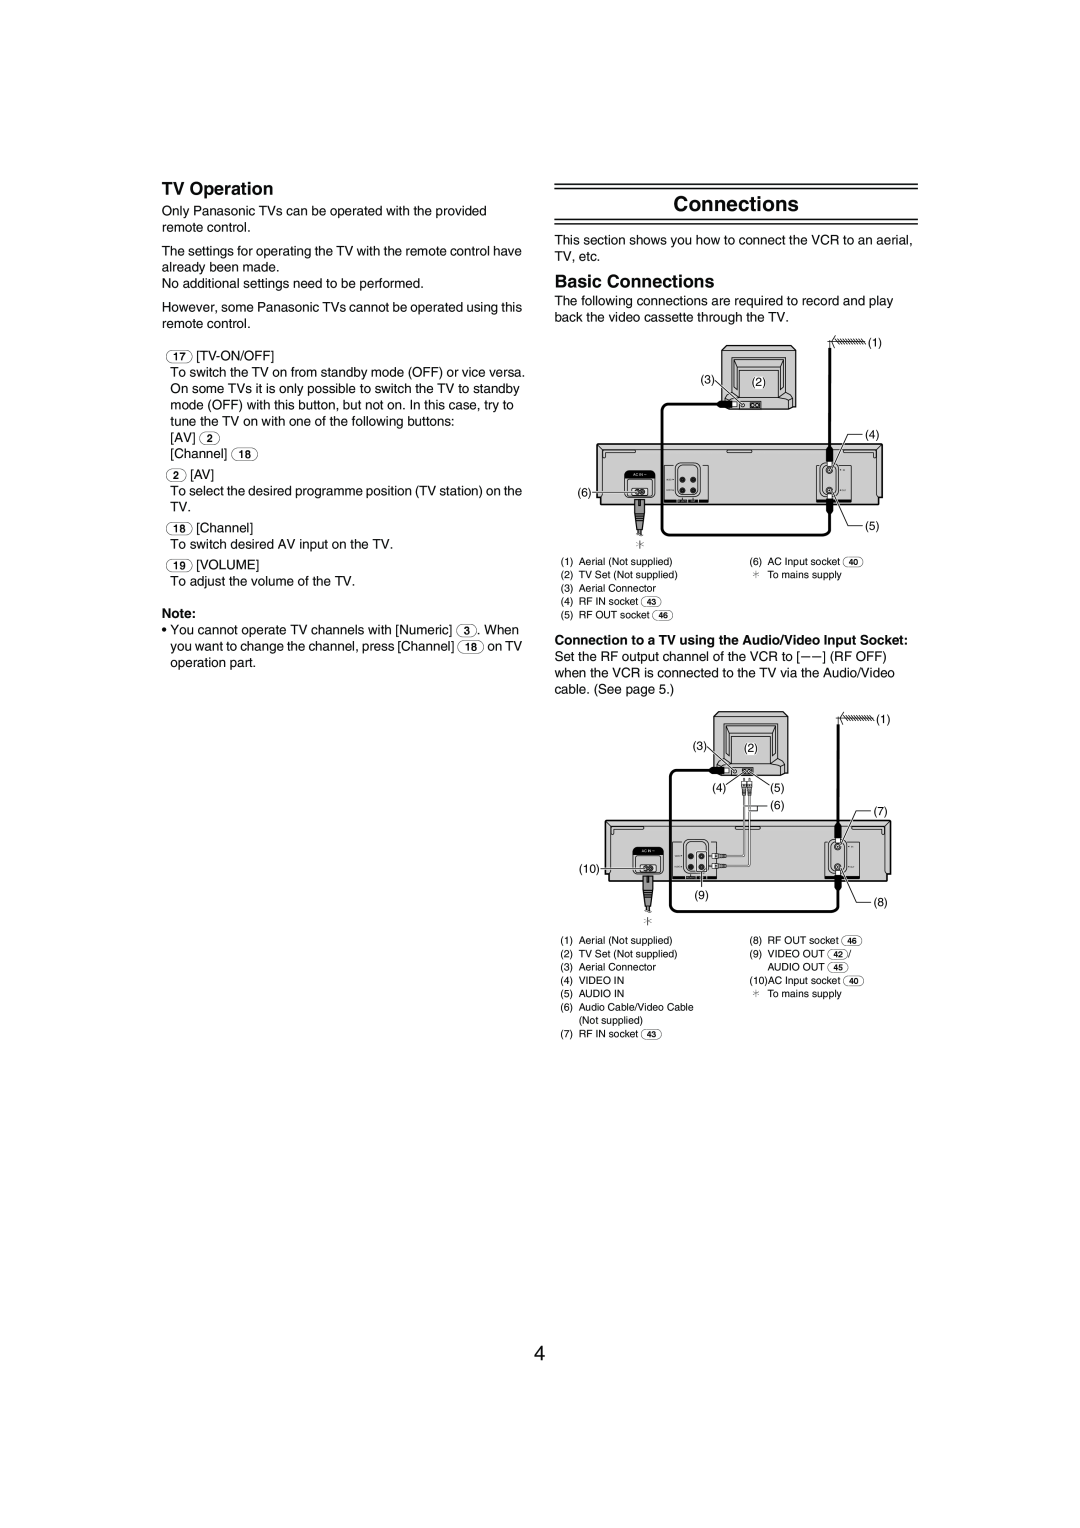 Panasonic NV-MV21 Series specifications TV Operation, Basic Connections 